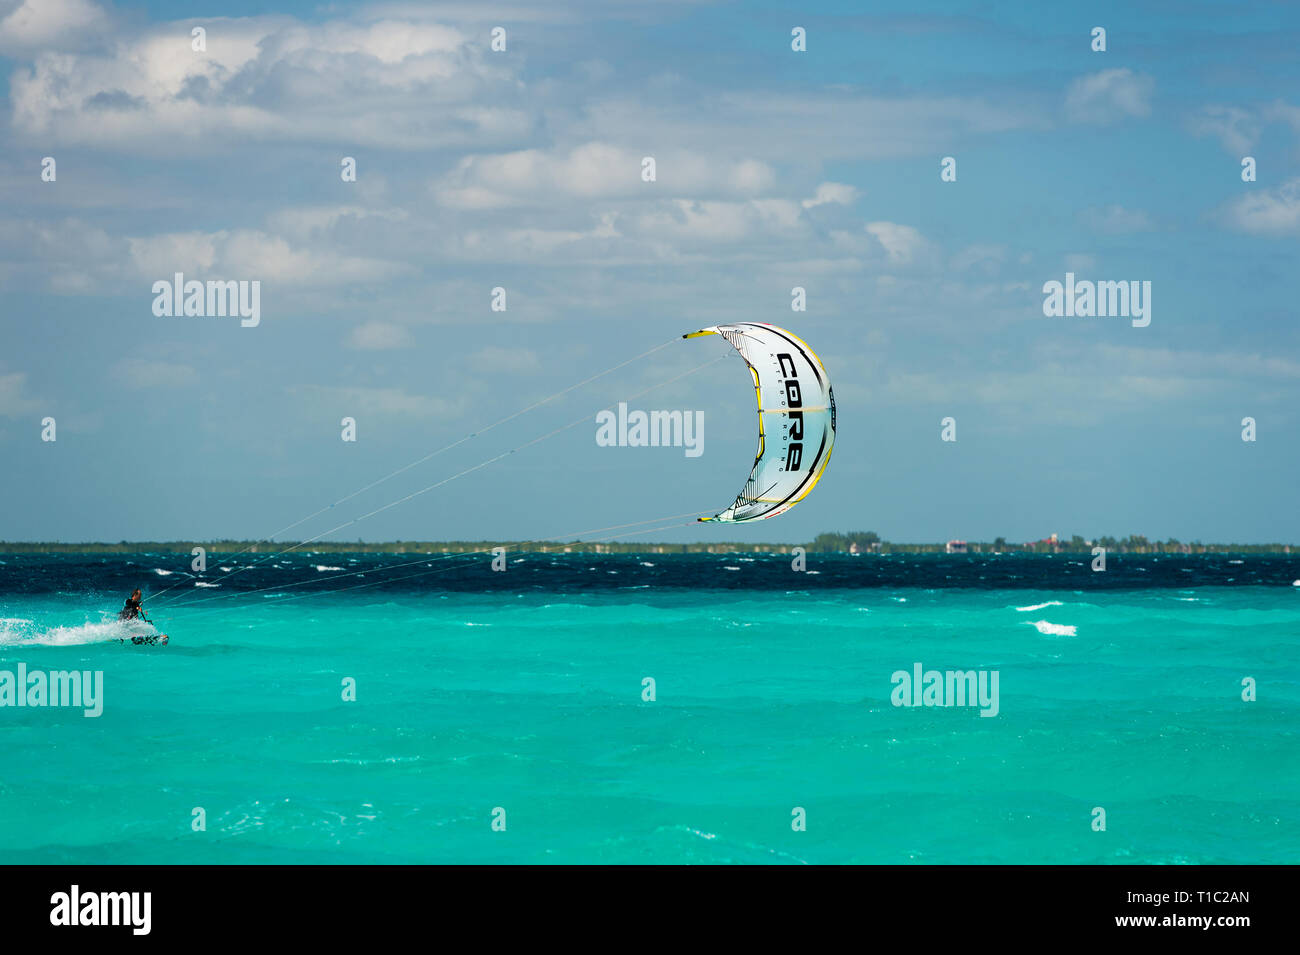 Kite Surfer in strong wind. Isla Mujeres, Mexico Stock Photo